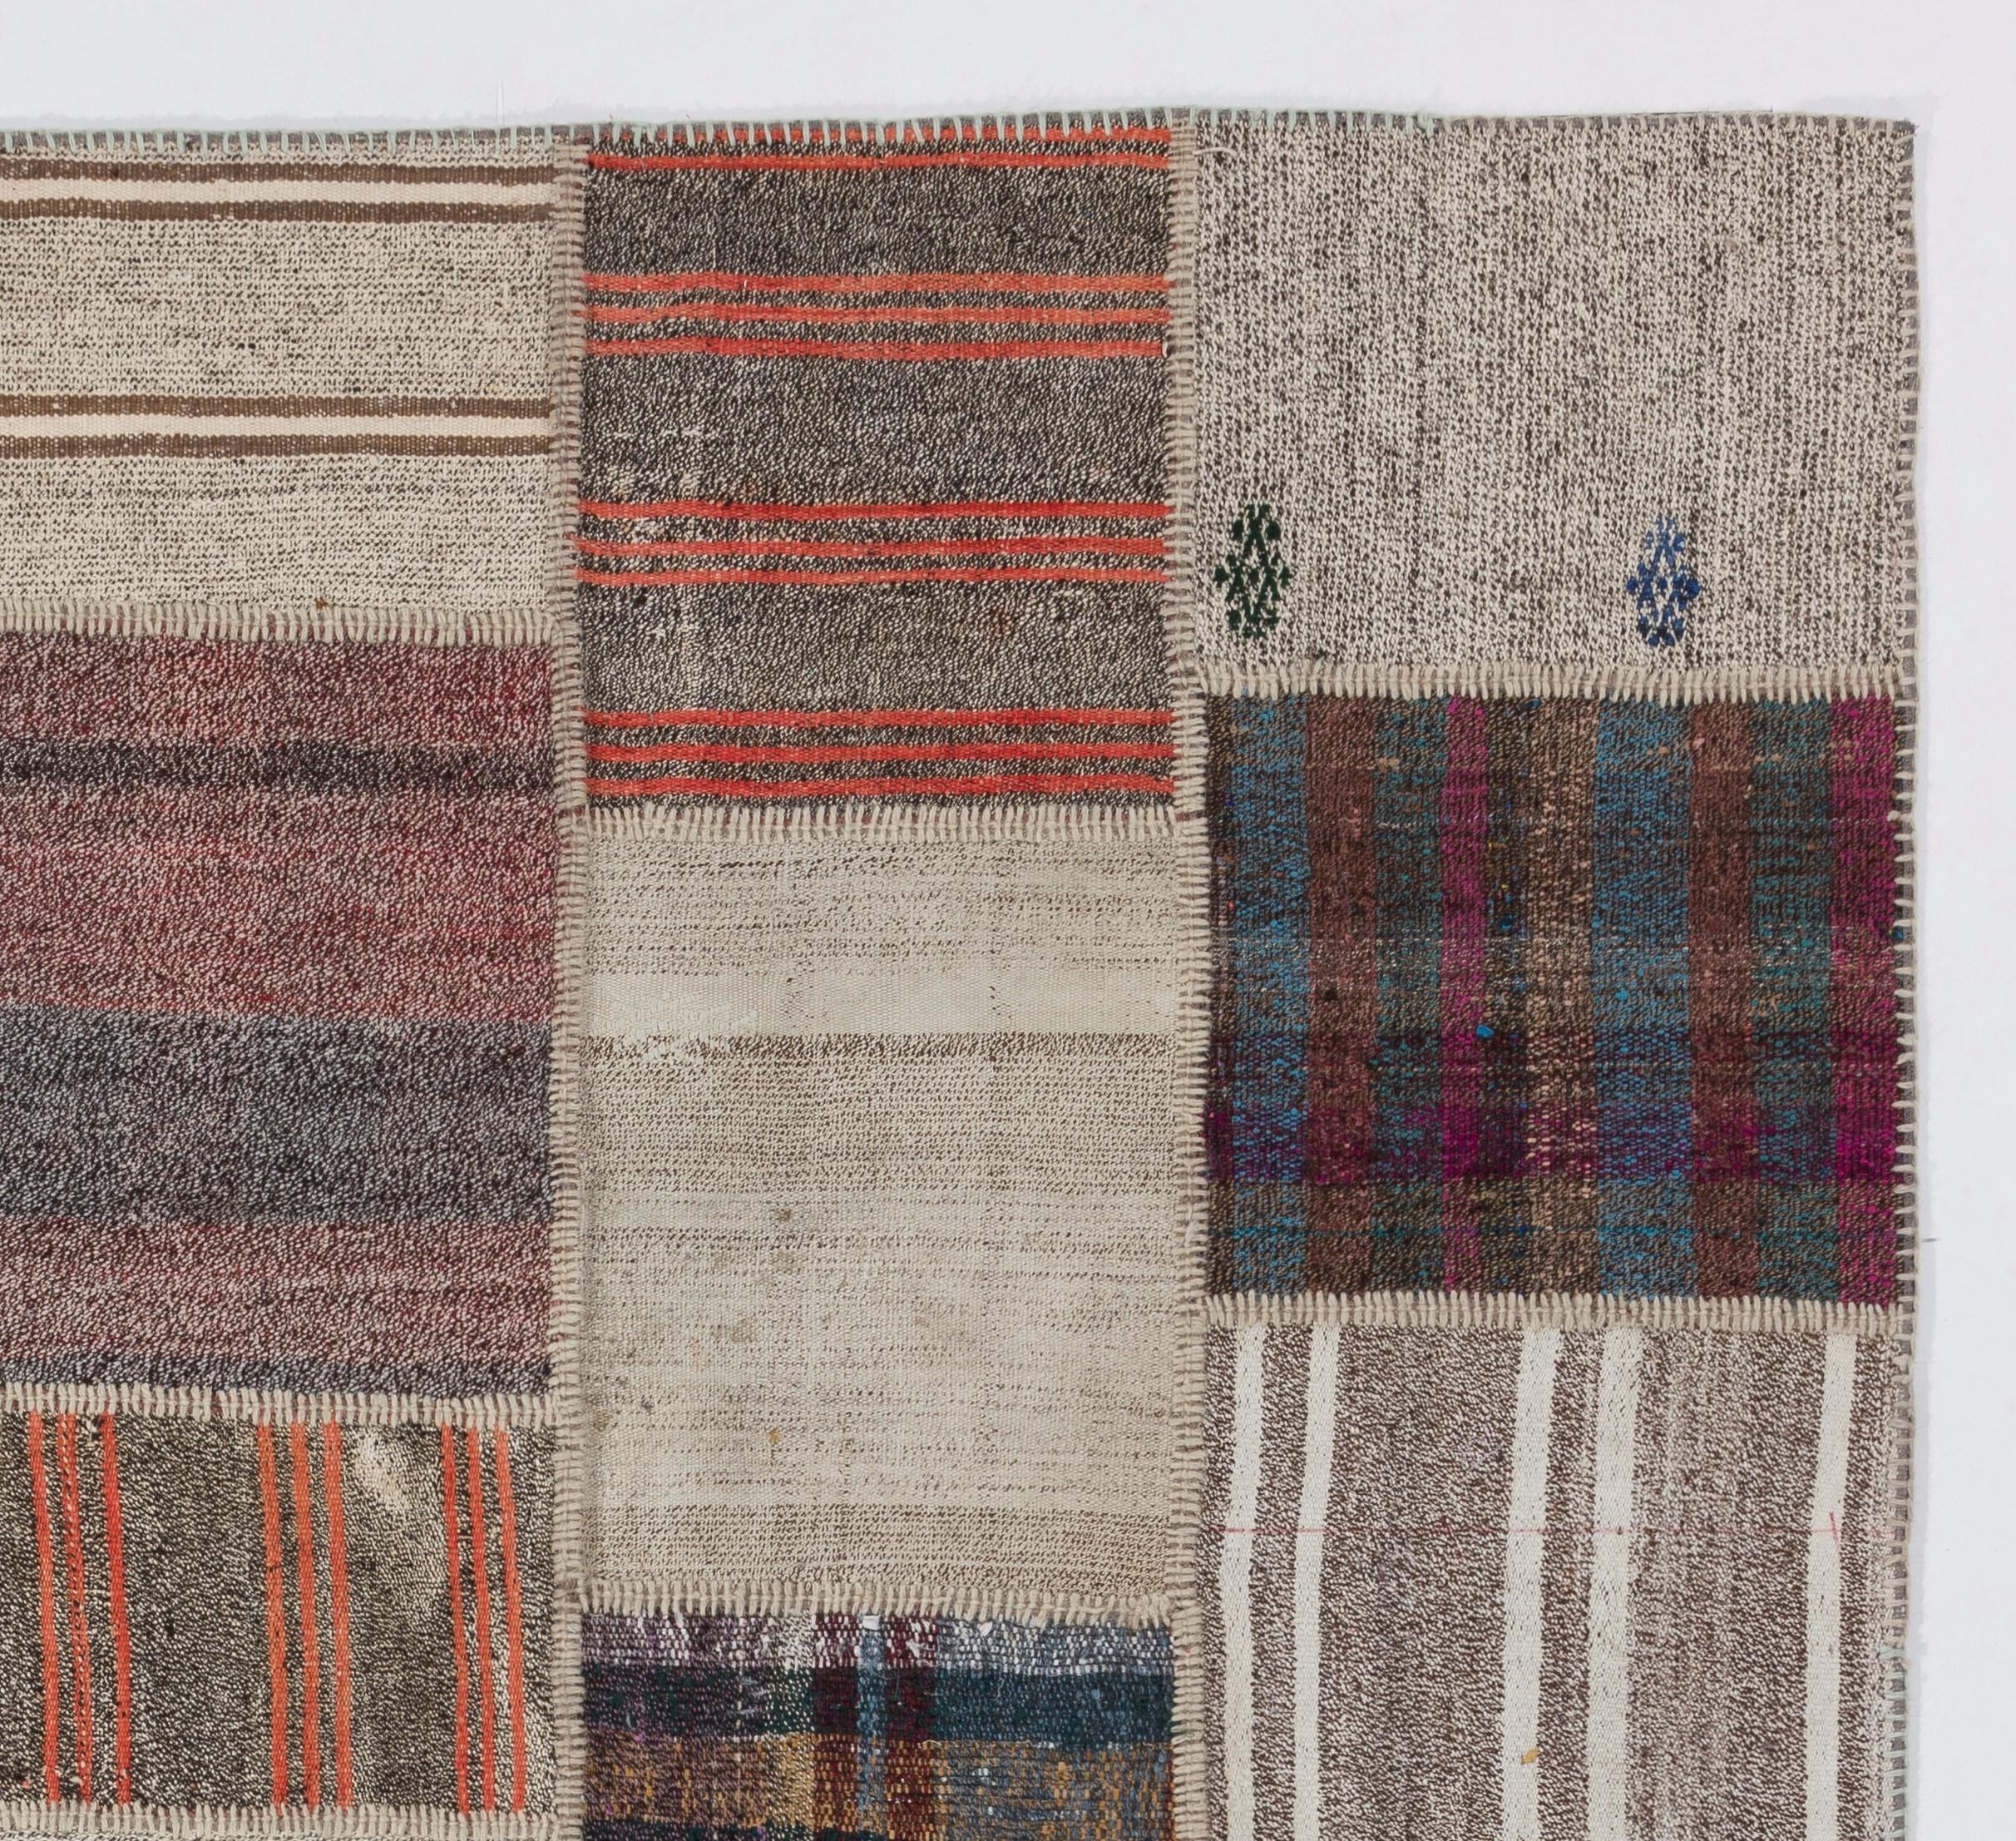 This floor covering is made of pieces of assorted vintage handmade Anatolian kilims.
Made of wool, cotton and goat hair. There is a durable cotton twill sewn on the back as an underlay and for a smooth finishing.